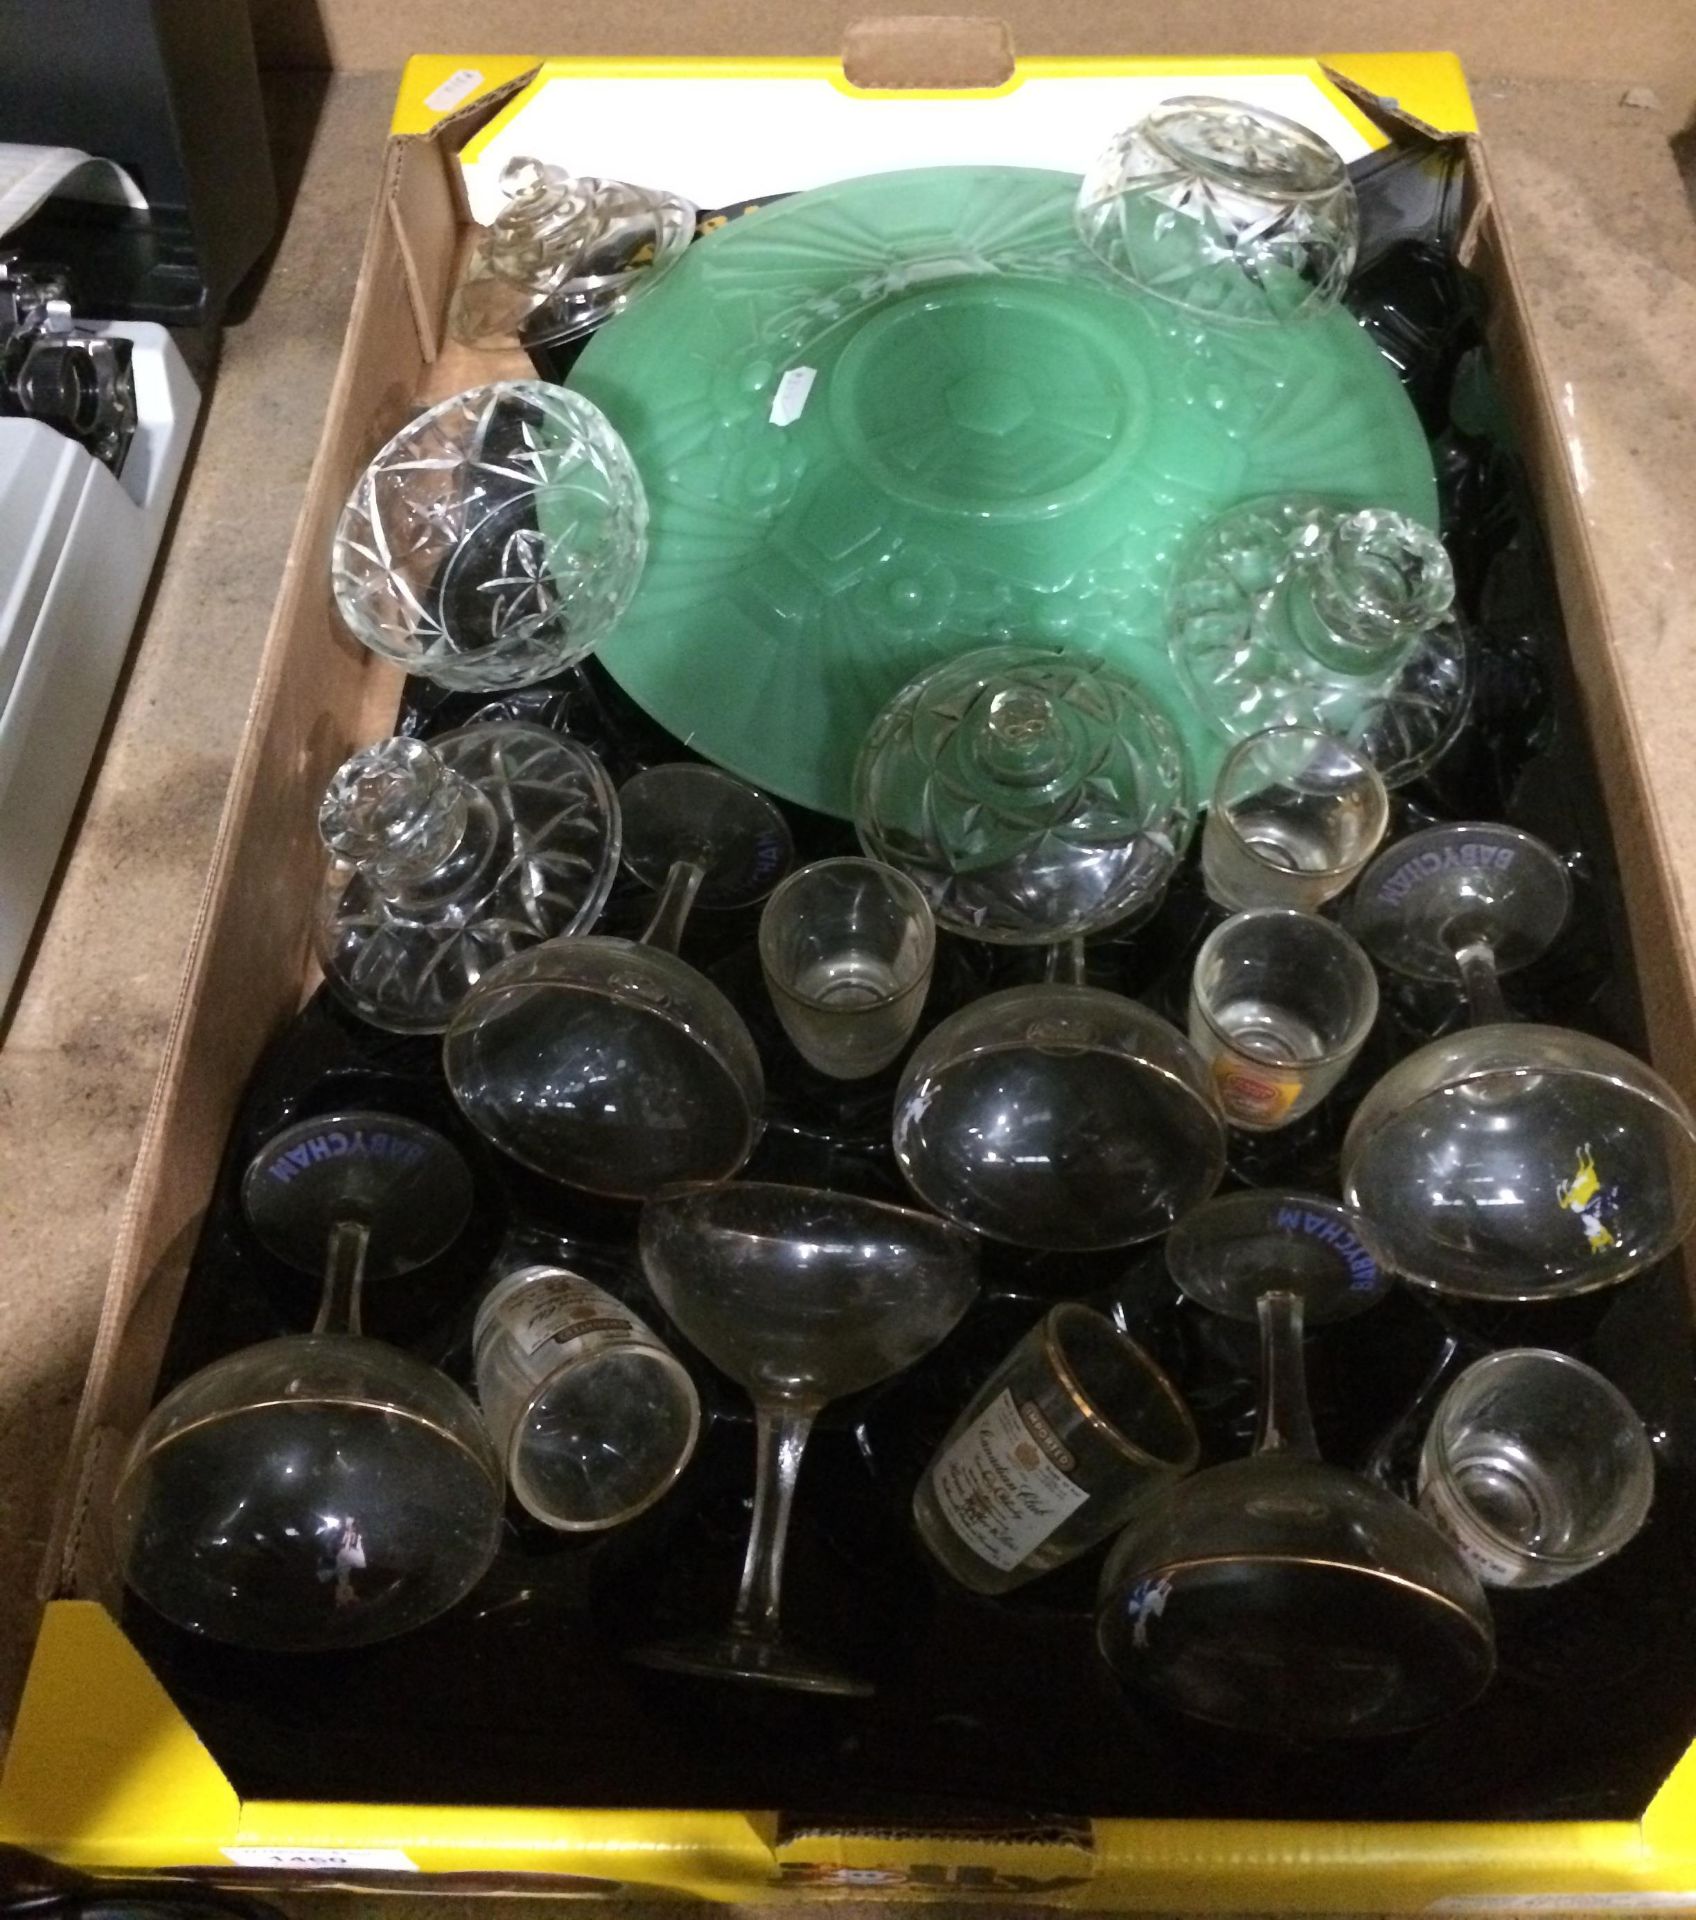 Contents to tray - six Babycham glasses and other glassware